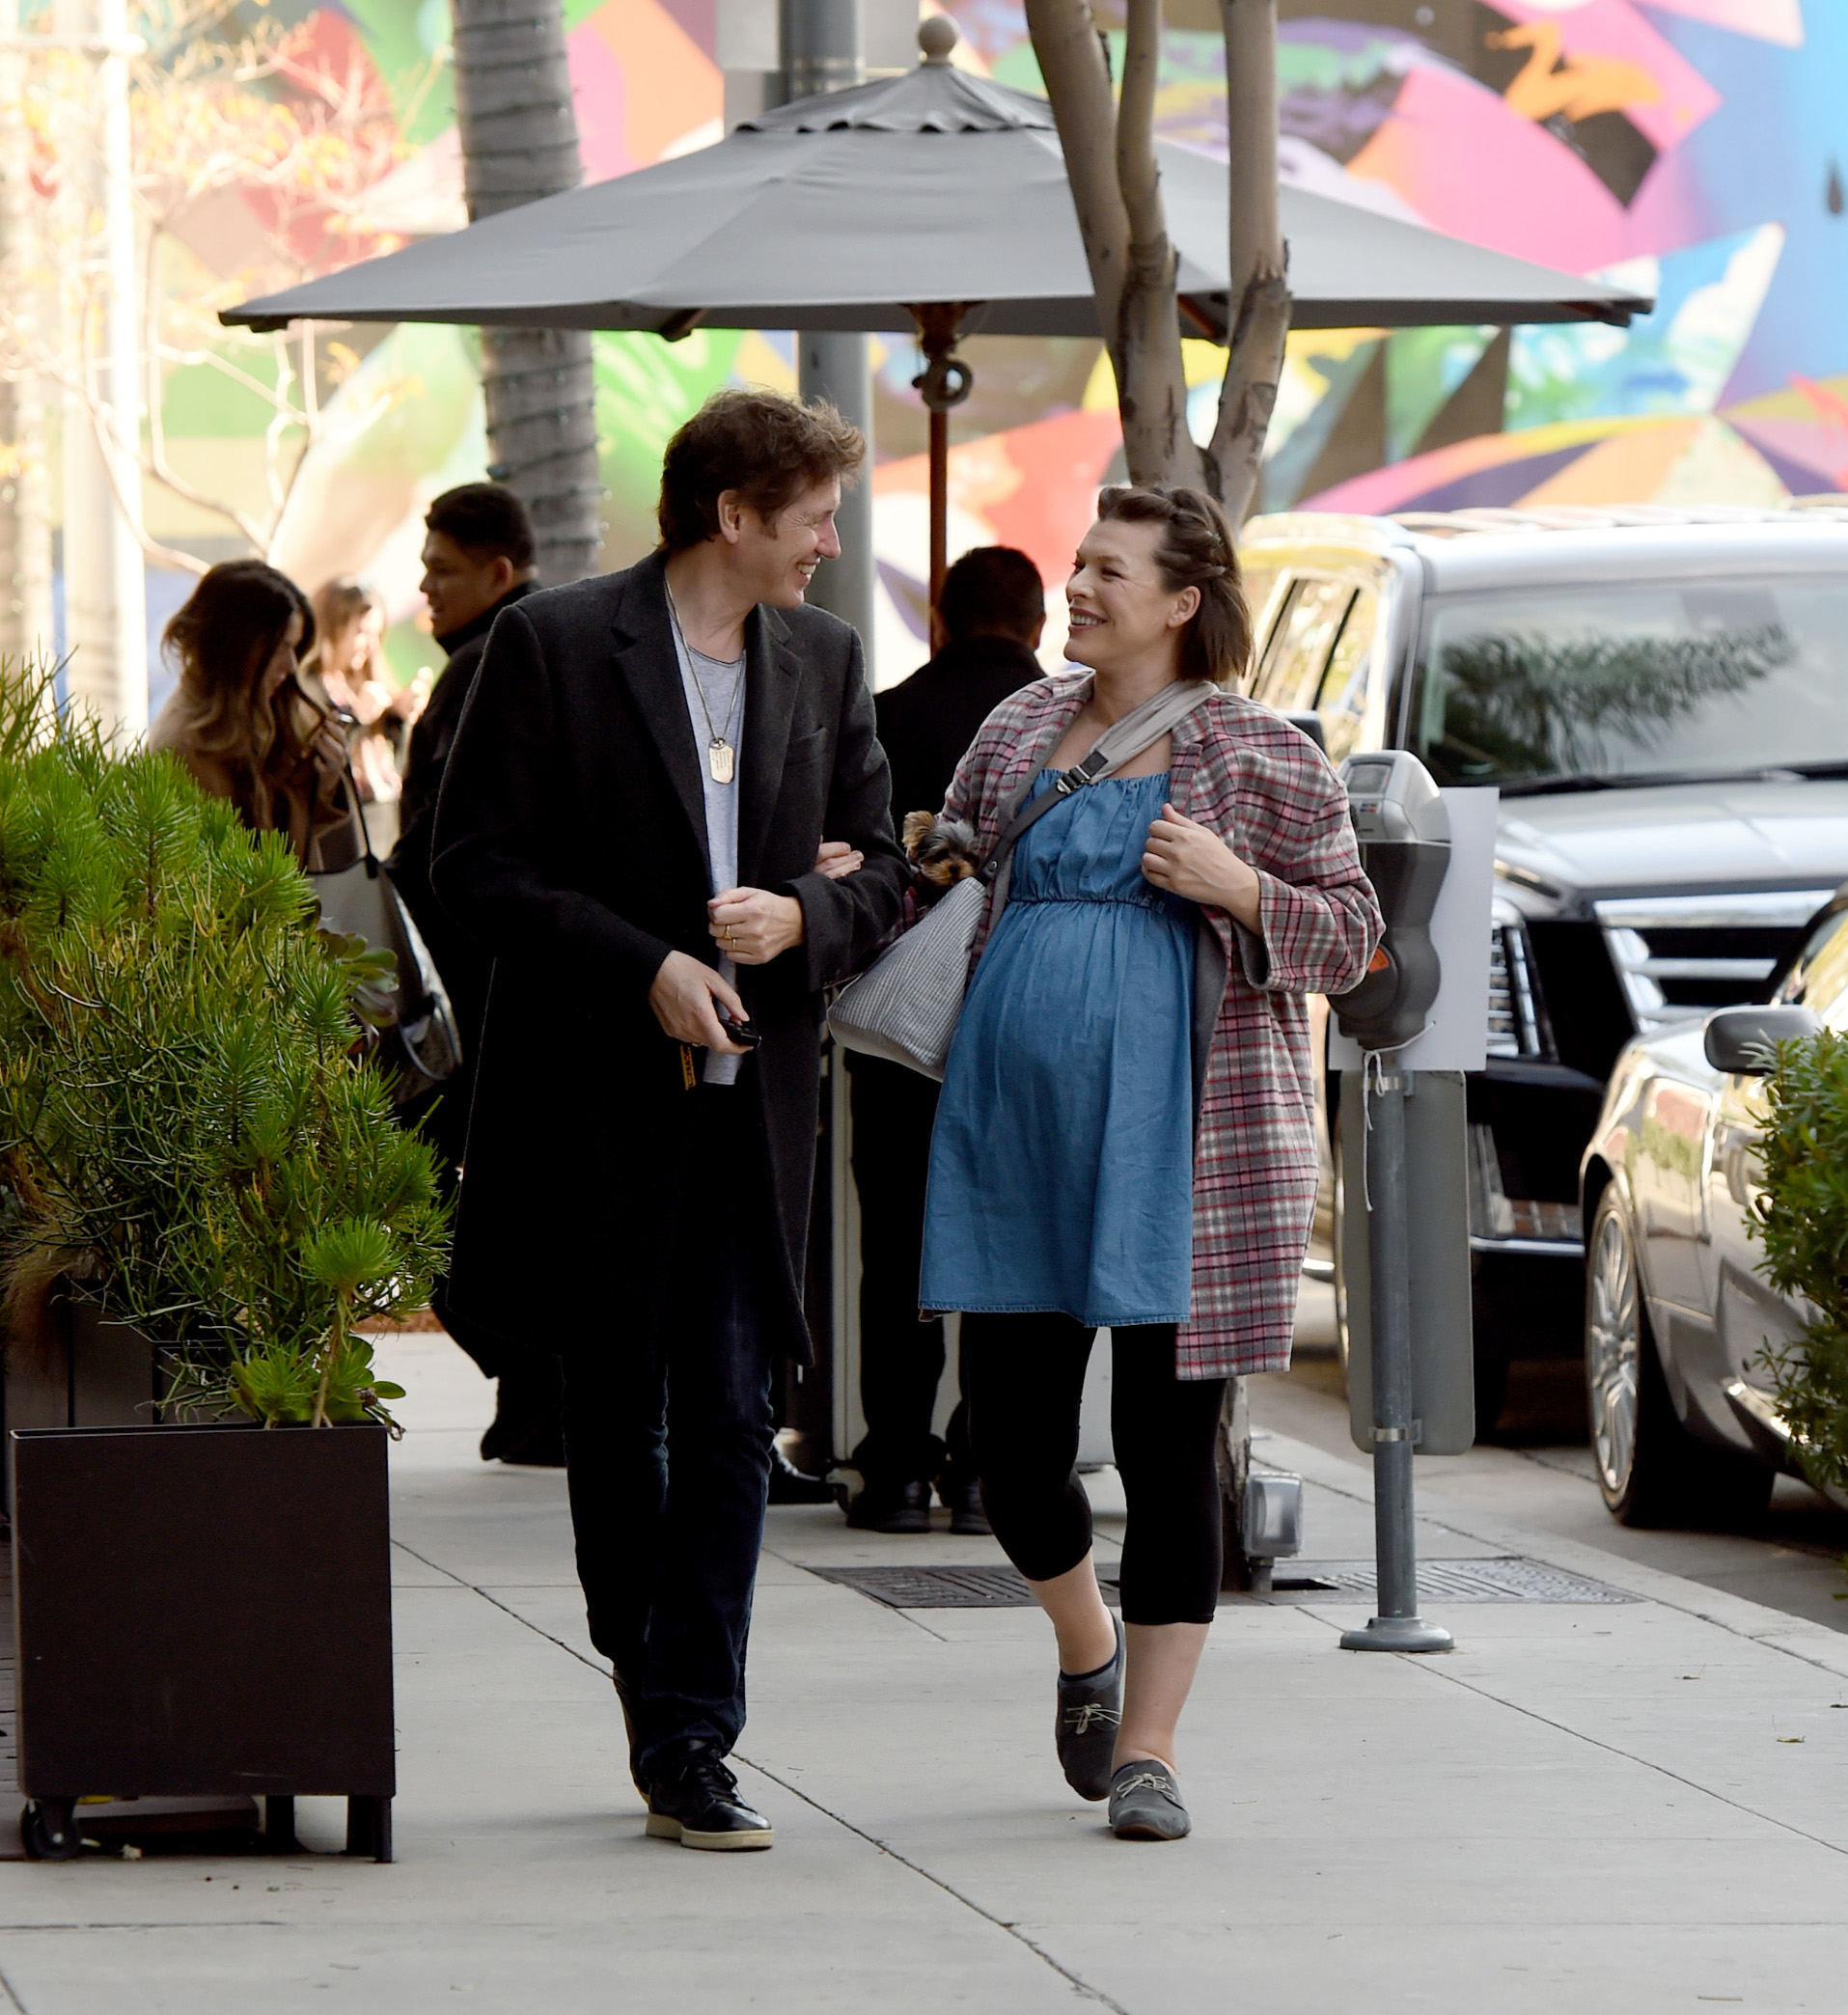 01/21/2020 EXCLUSIVE: Milla Jovovich shows off her burgeoning baby bump as she and husband Paul head to Spago restaurant in Beverly Hills, California. The two were in a very joyous mood as they walked to their car after their meal. Milla is wearing a plaid blazer, black leggings and baby blue loose fitted dress., Image: 494007773, License: Rights-managed, Restrictions: Exclusive NO usage without agreed price and terms. Please contact sales@theimagedirect.com, Model Release: no, Credit line: TheImageDirect.com / The Image Direct / Profimedia